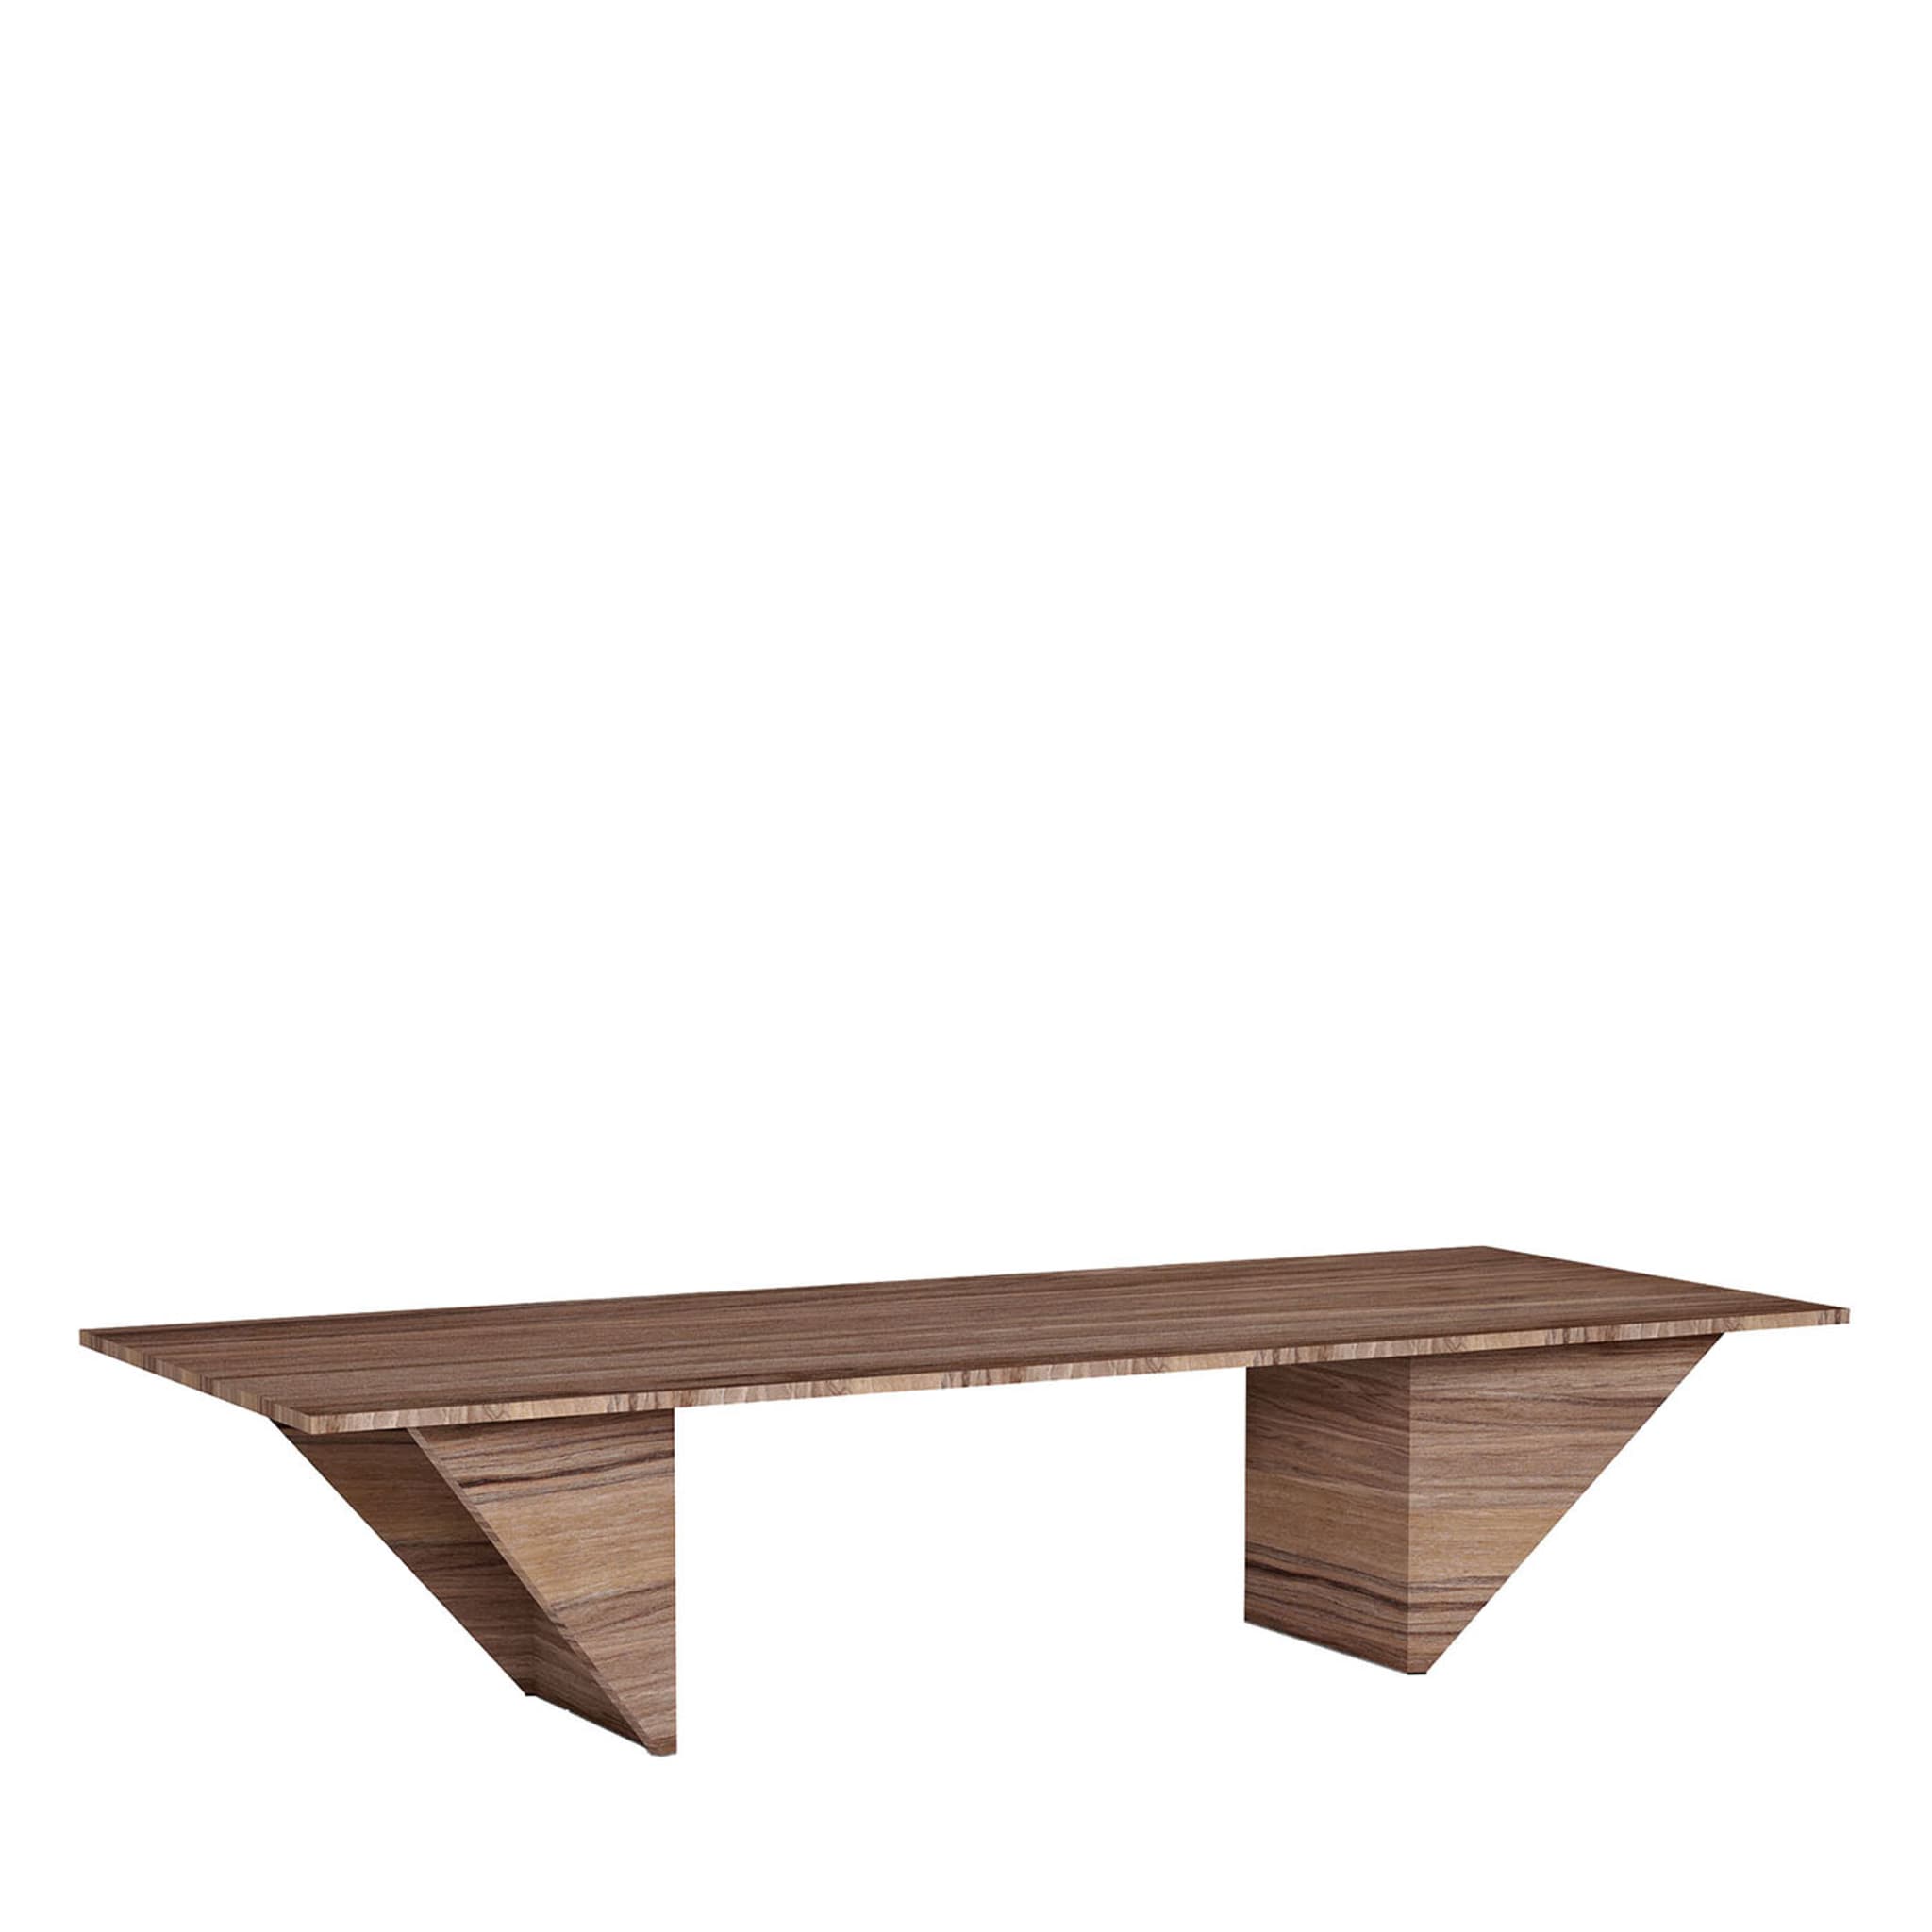 PAR.XR Wood Dining Table - Main view